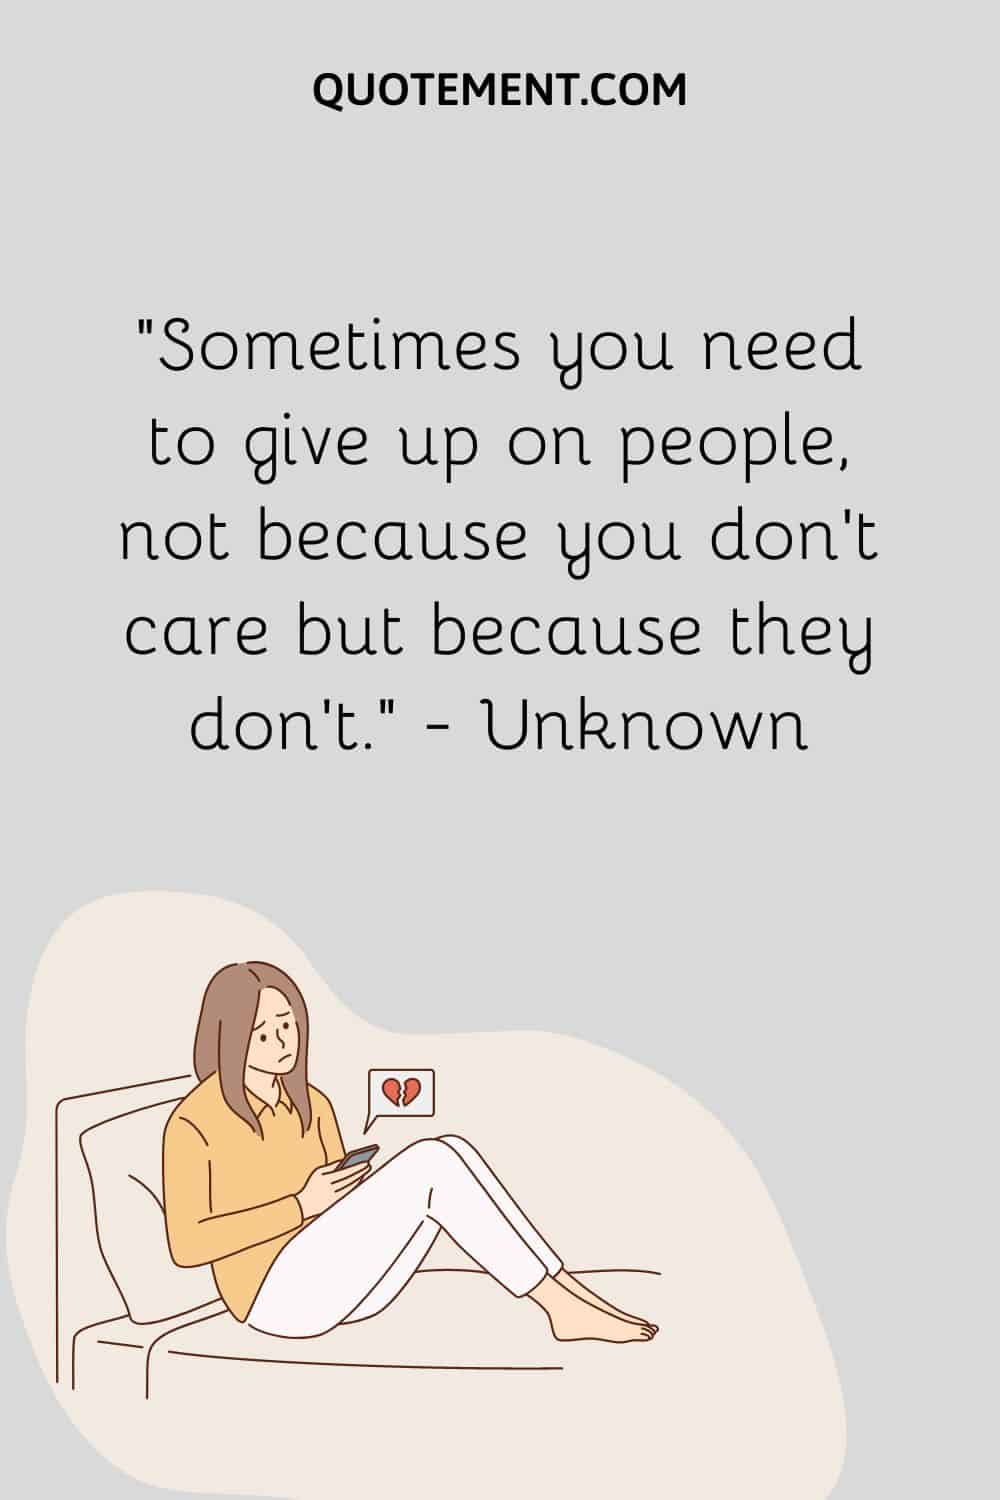 Sometimes you need to give up on people, not because you don’t care but because they don’t